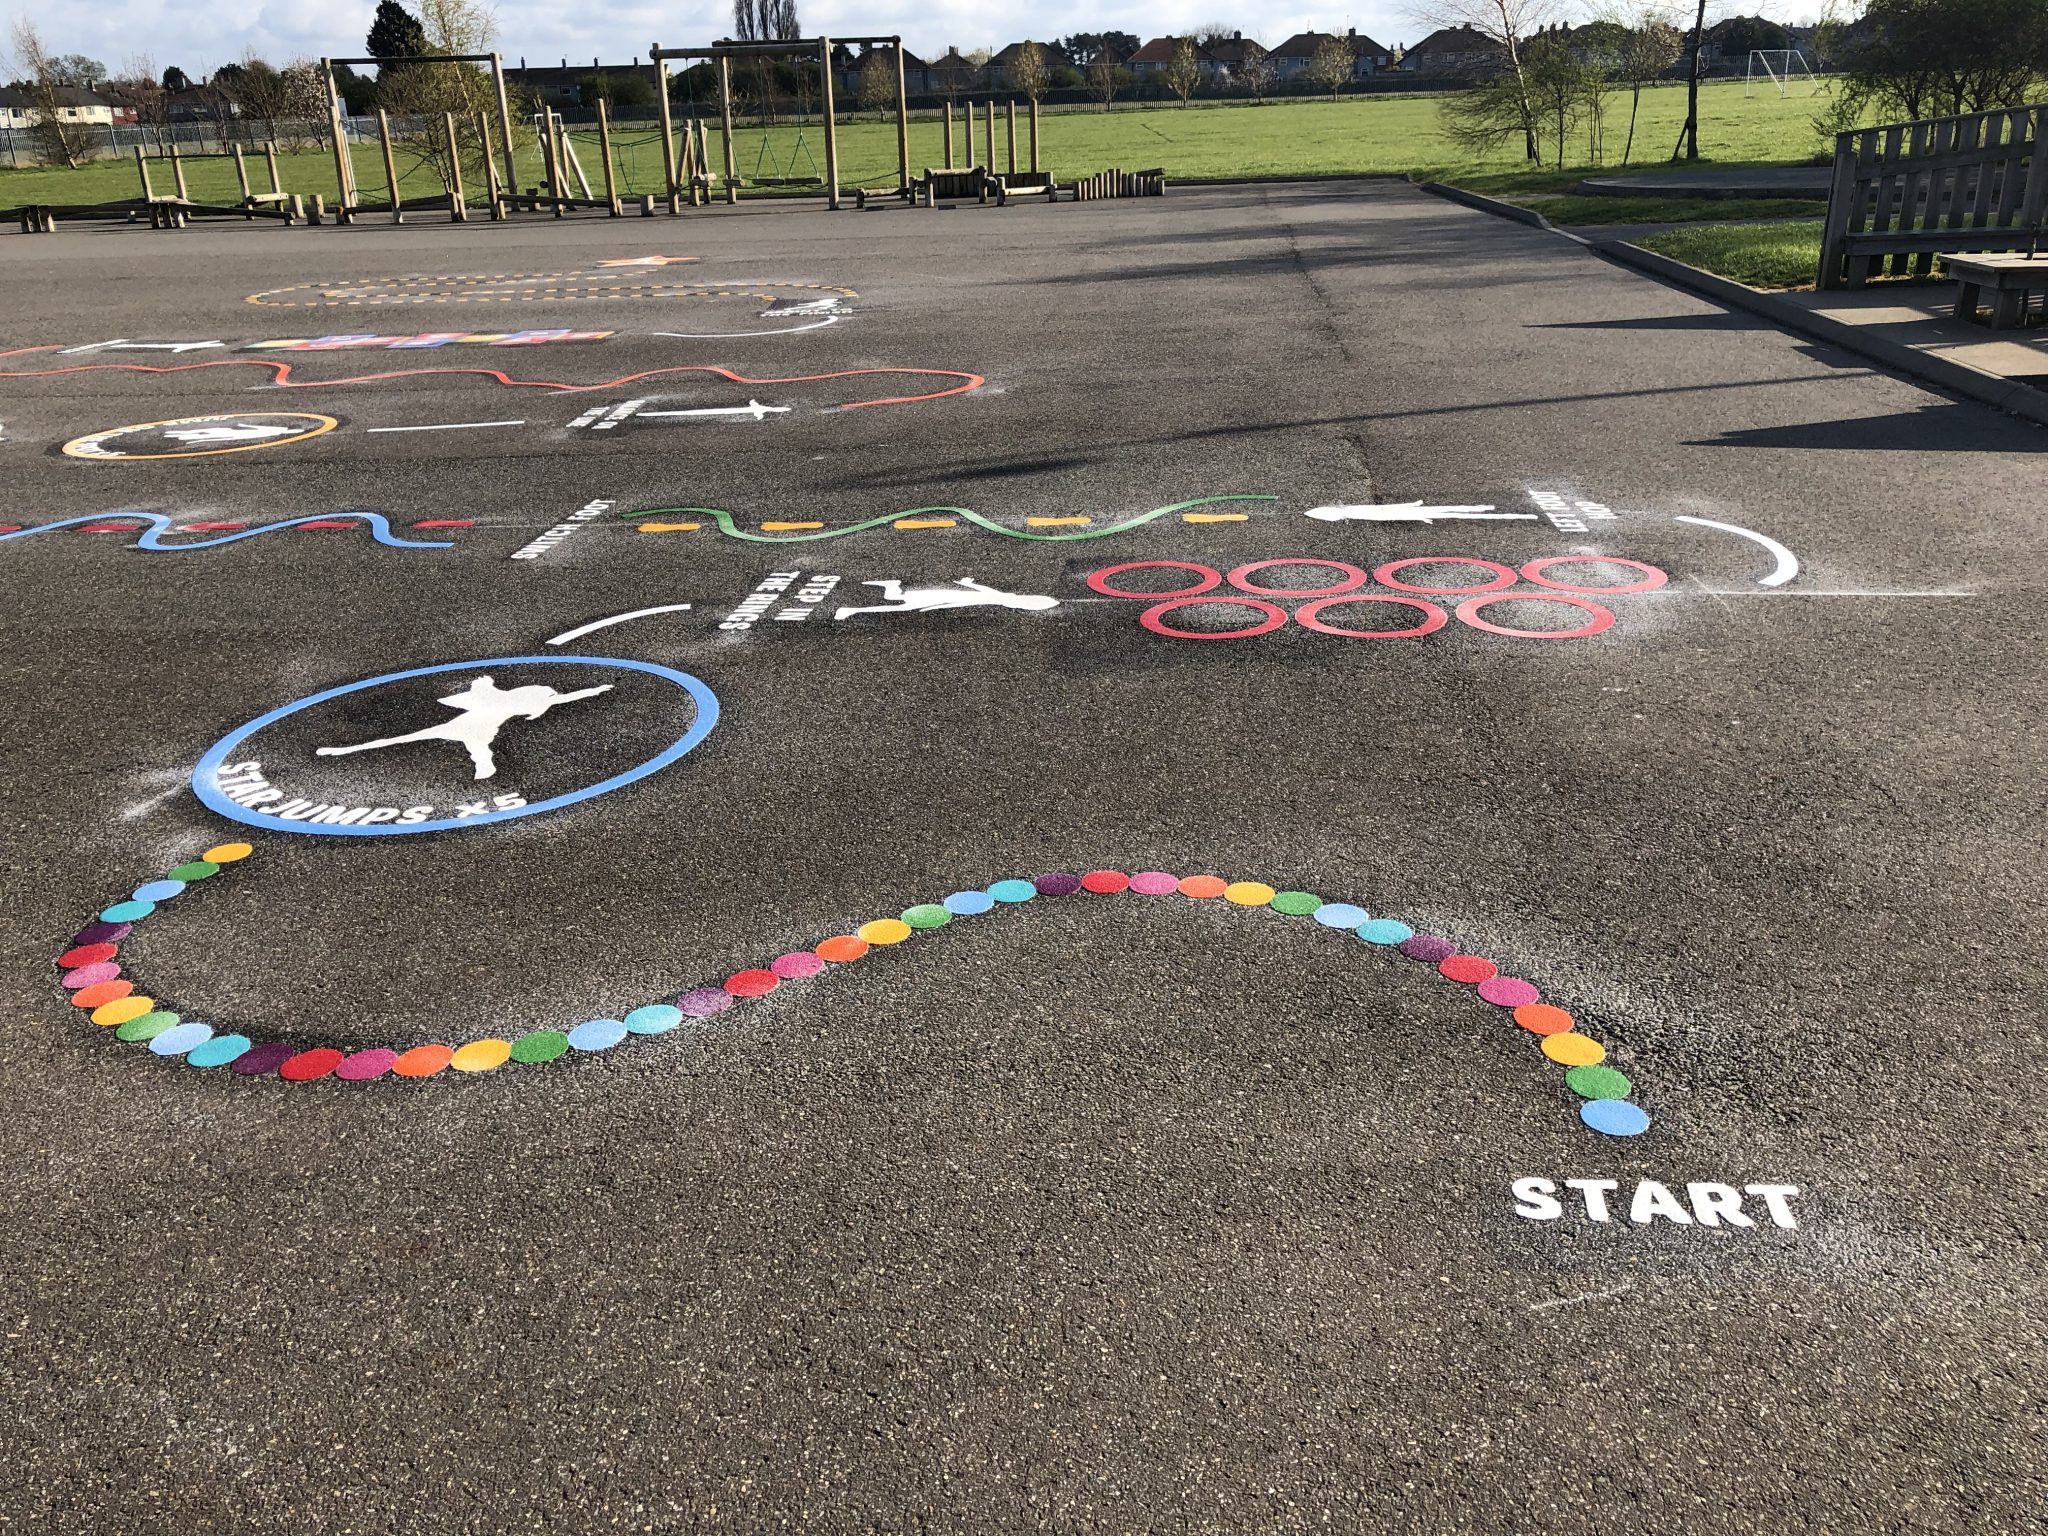 Benefits of playground markings for youth groups